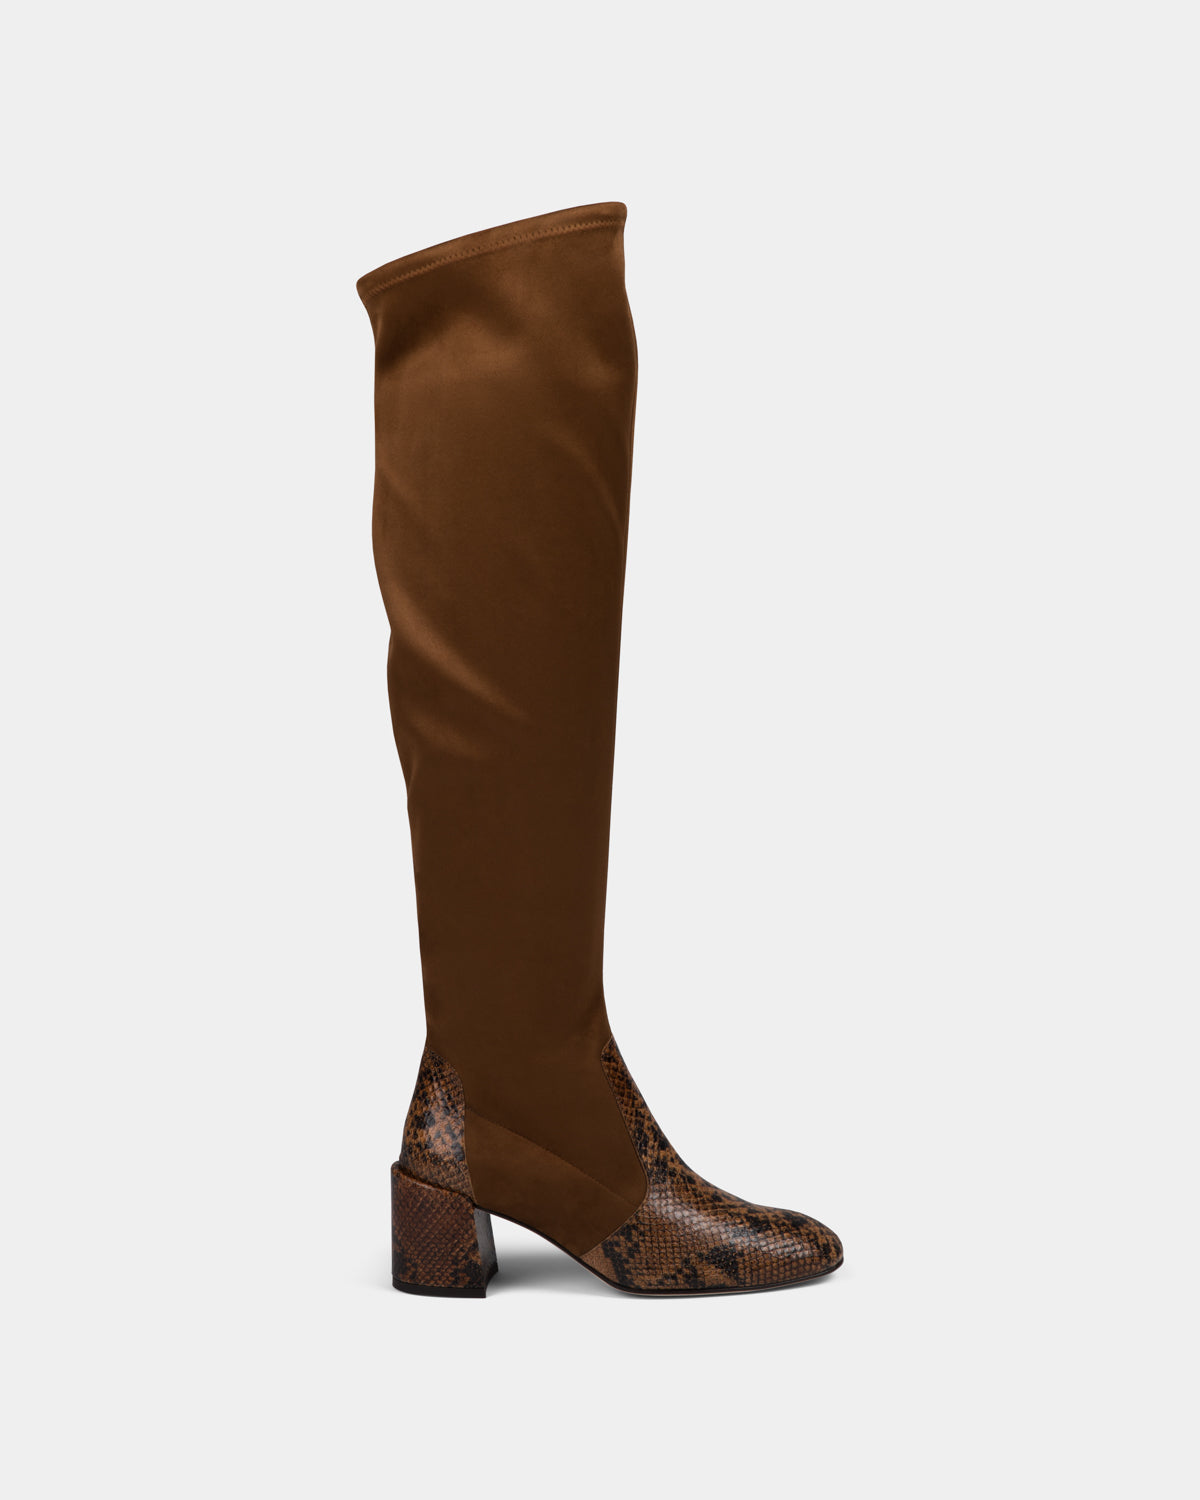 kallu-kallú-brown-snake-leather-shoes-for-women-made-in-spain-boots-long-boots